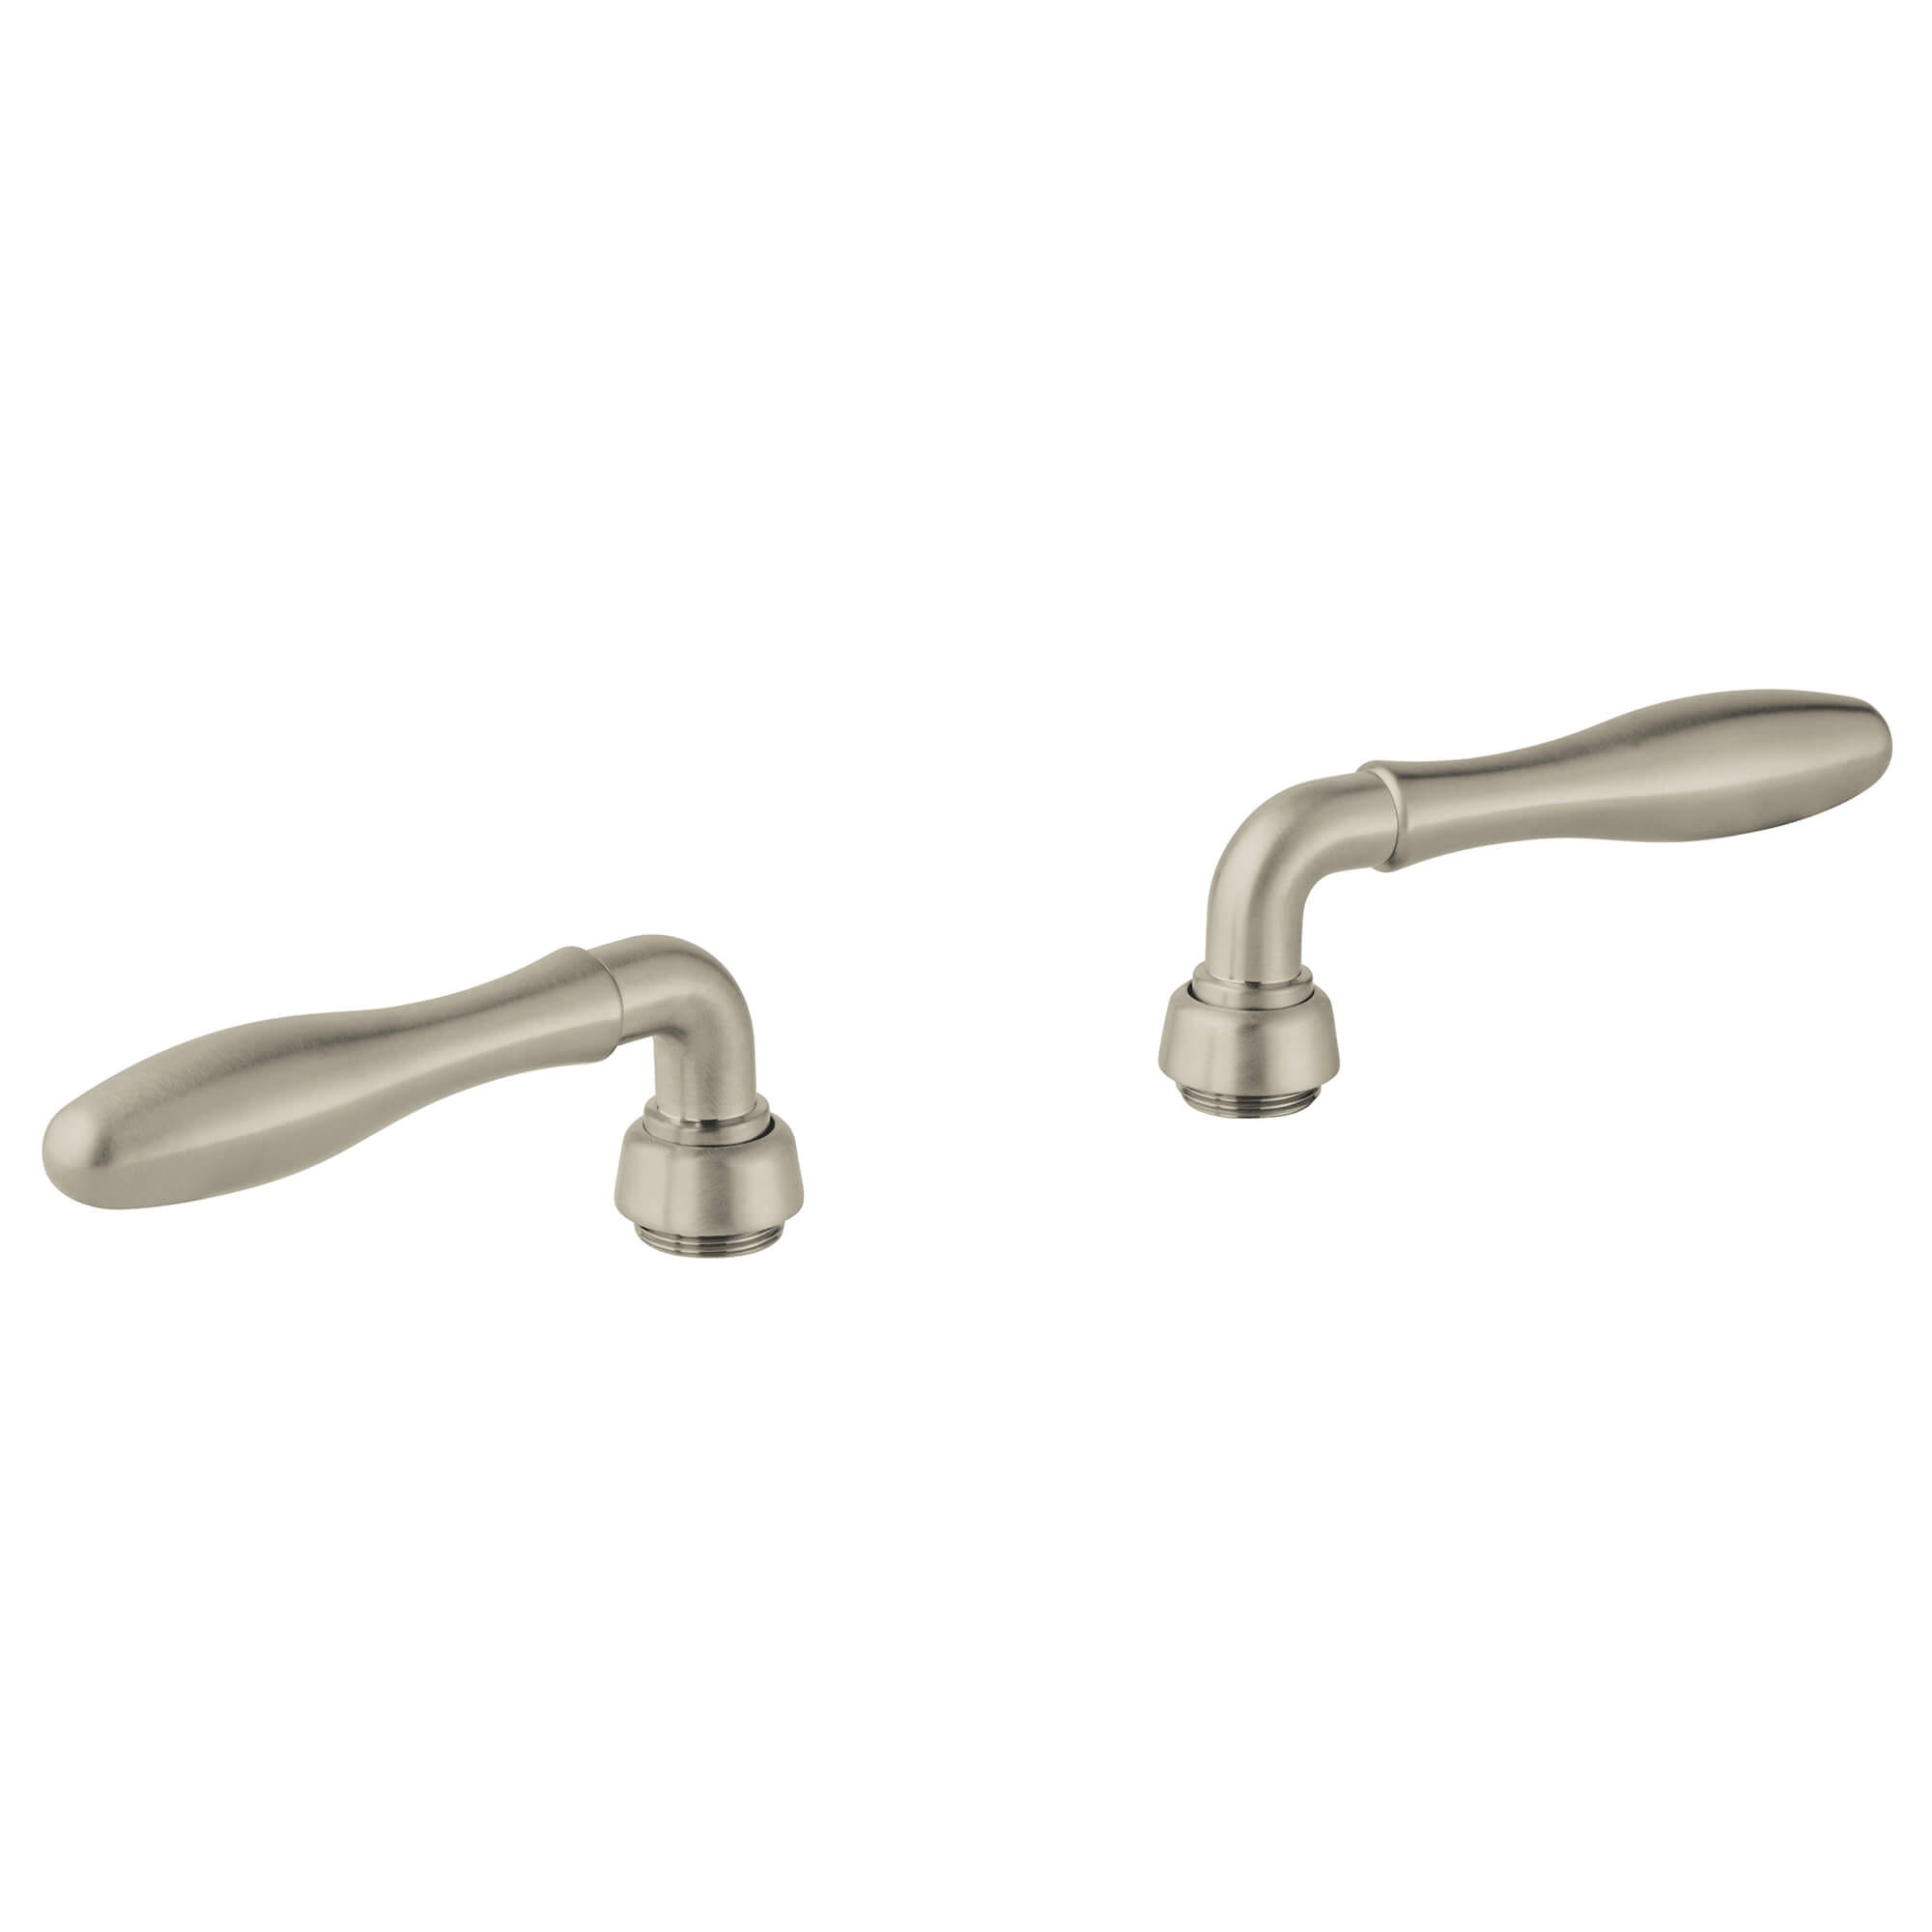 Seabury Manette leviers la paire GROHE BRUSHED NICKEL